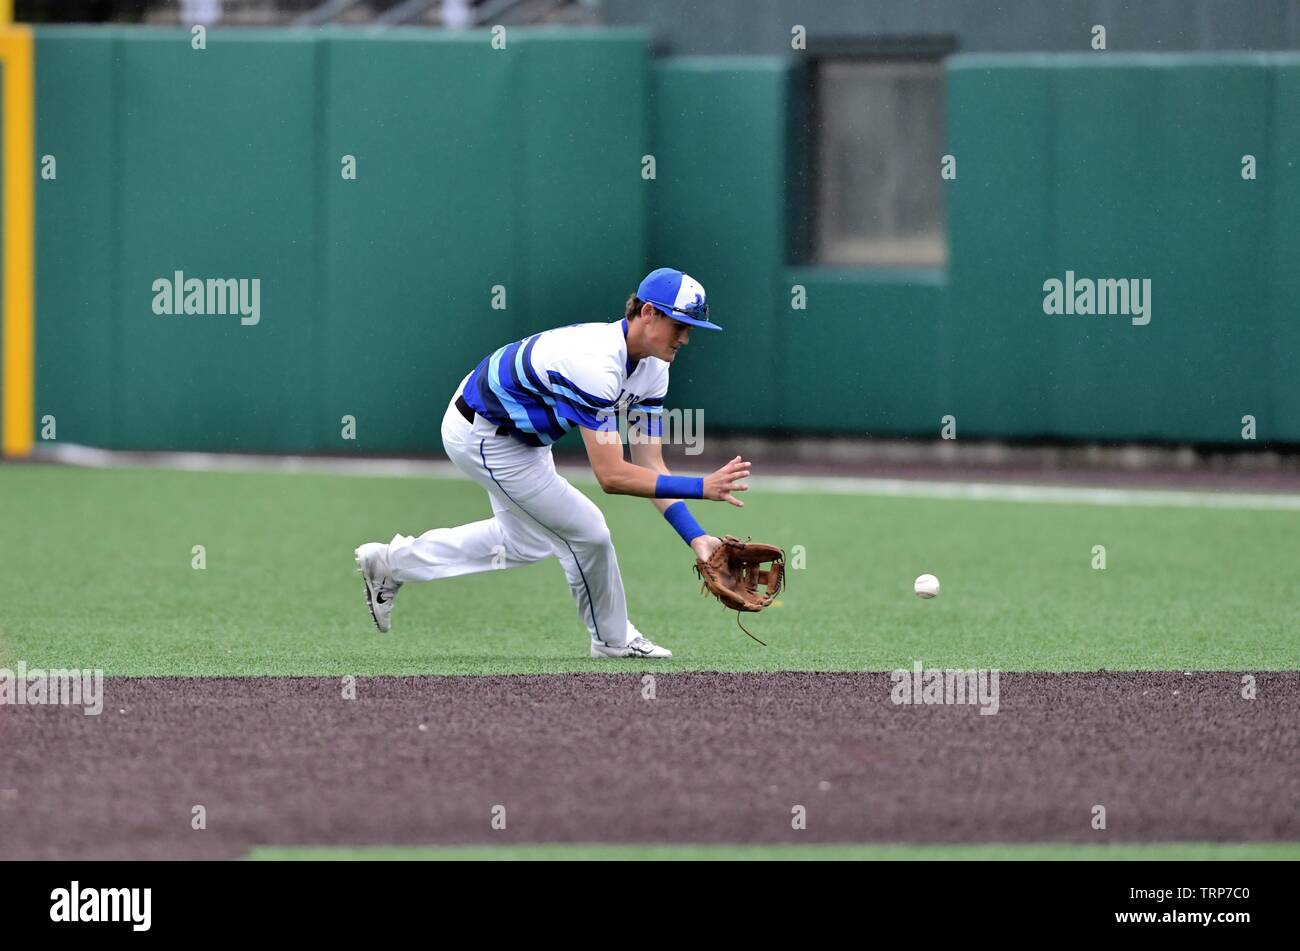 Second baseman ranging far to his left to field a ground ball on the outfield turf before throwing the batter out at first. USA. Stock Photo